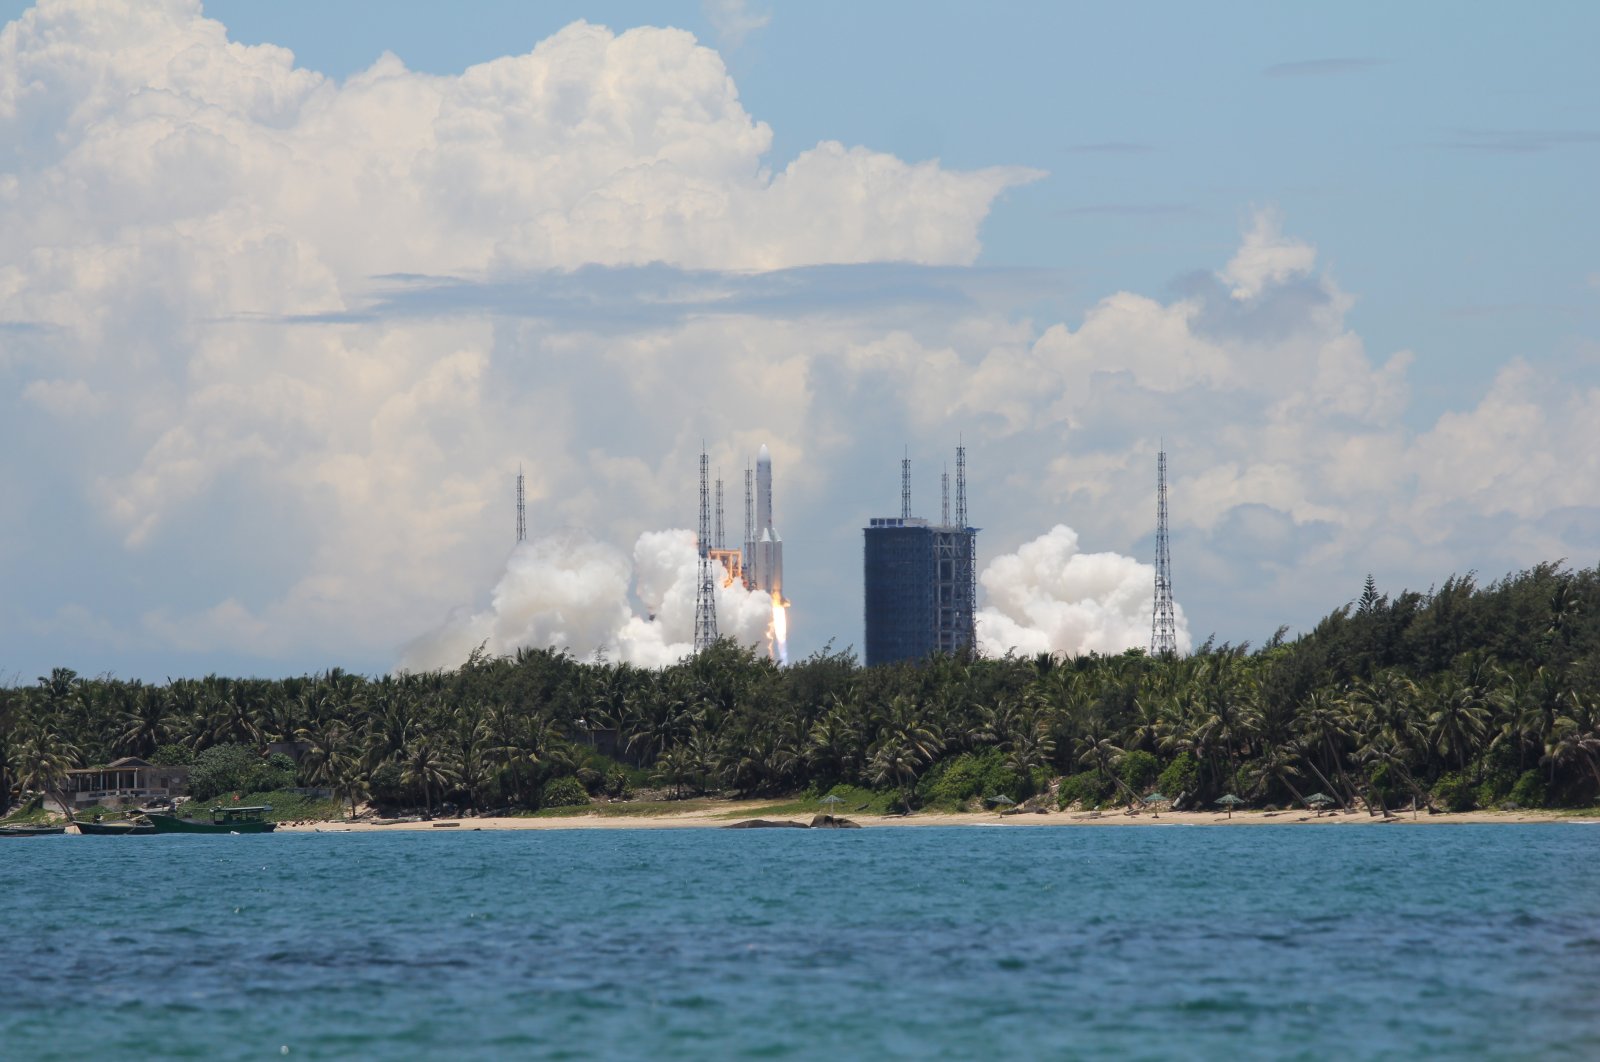 China's Tianwen-1 launches from the Wenchang spaceport for the Mars mission, Hainan, China, July, 23, 2020. (Shutterstock Photo)